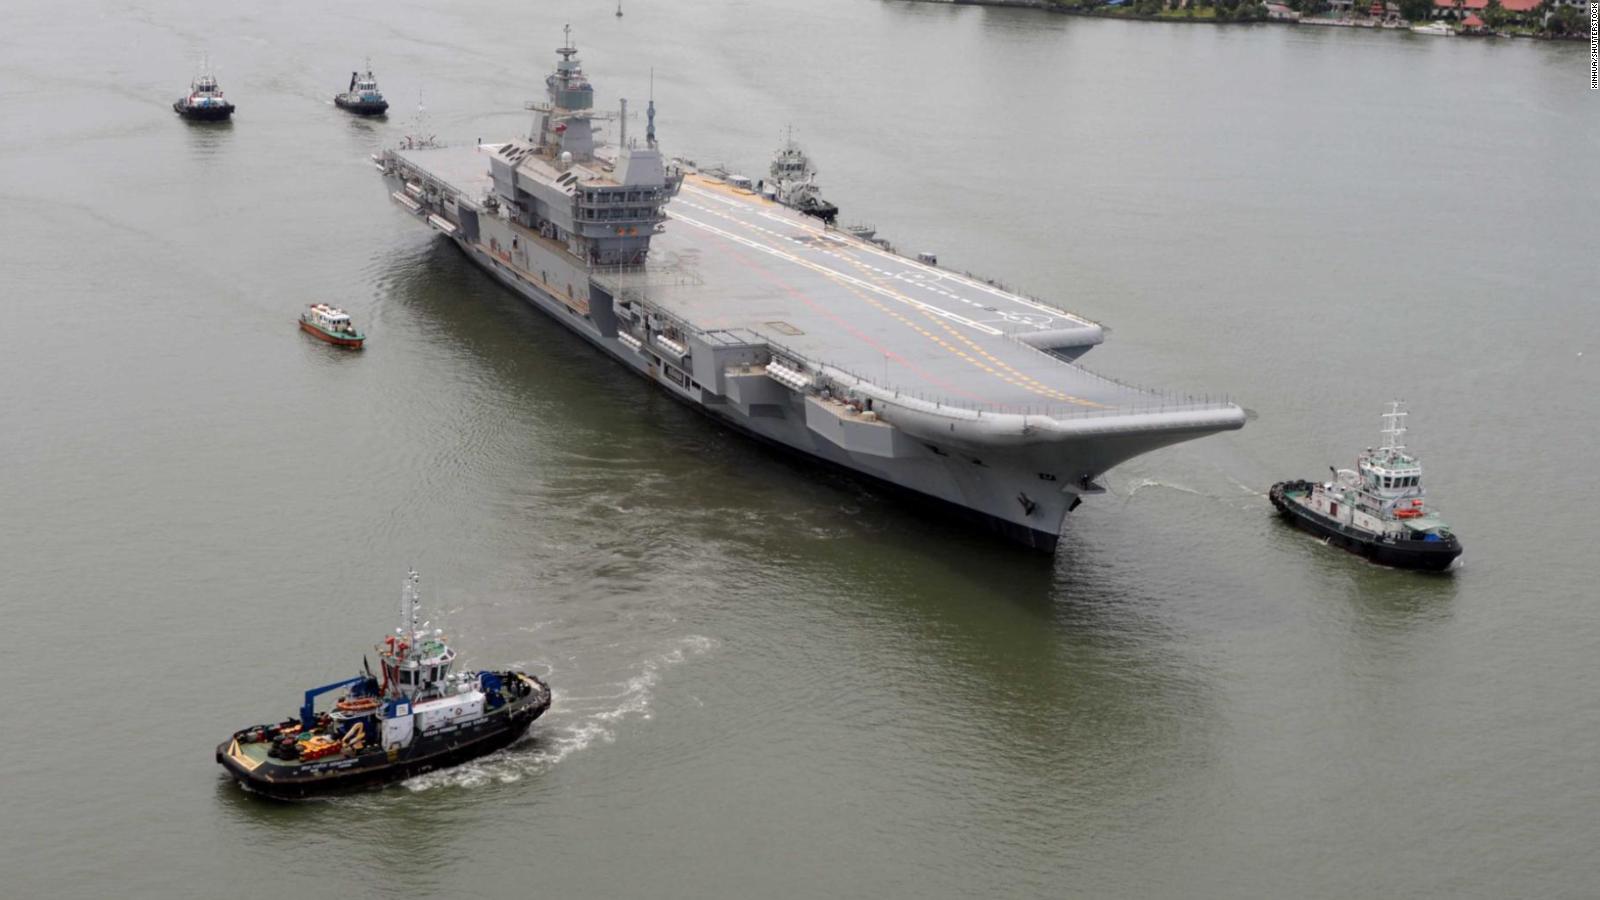 India joins the elite naval power with the aircraft carrier Vikrant